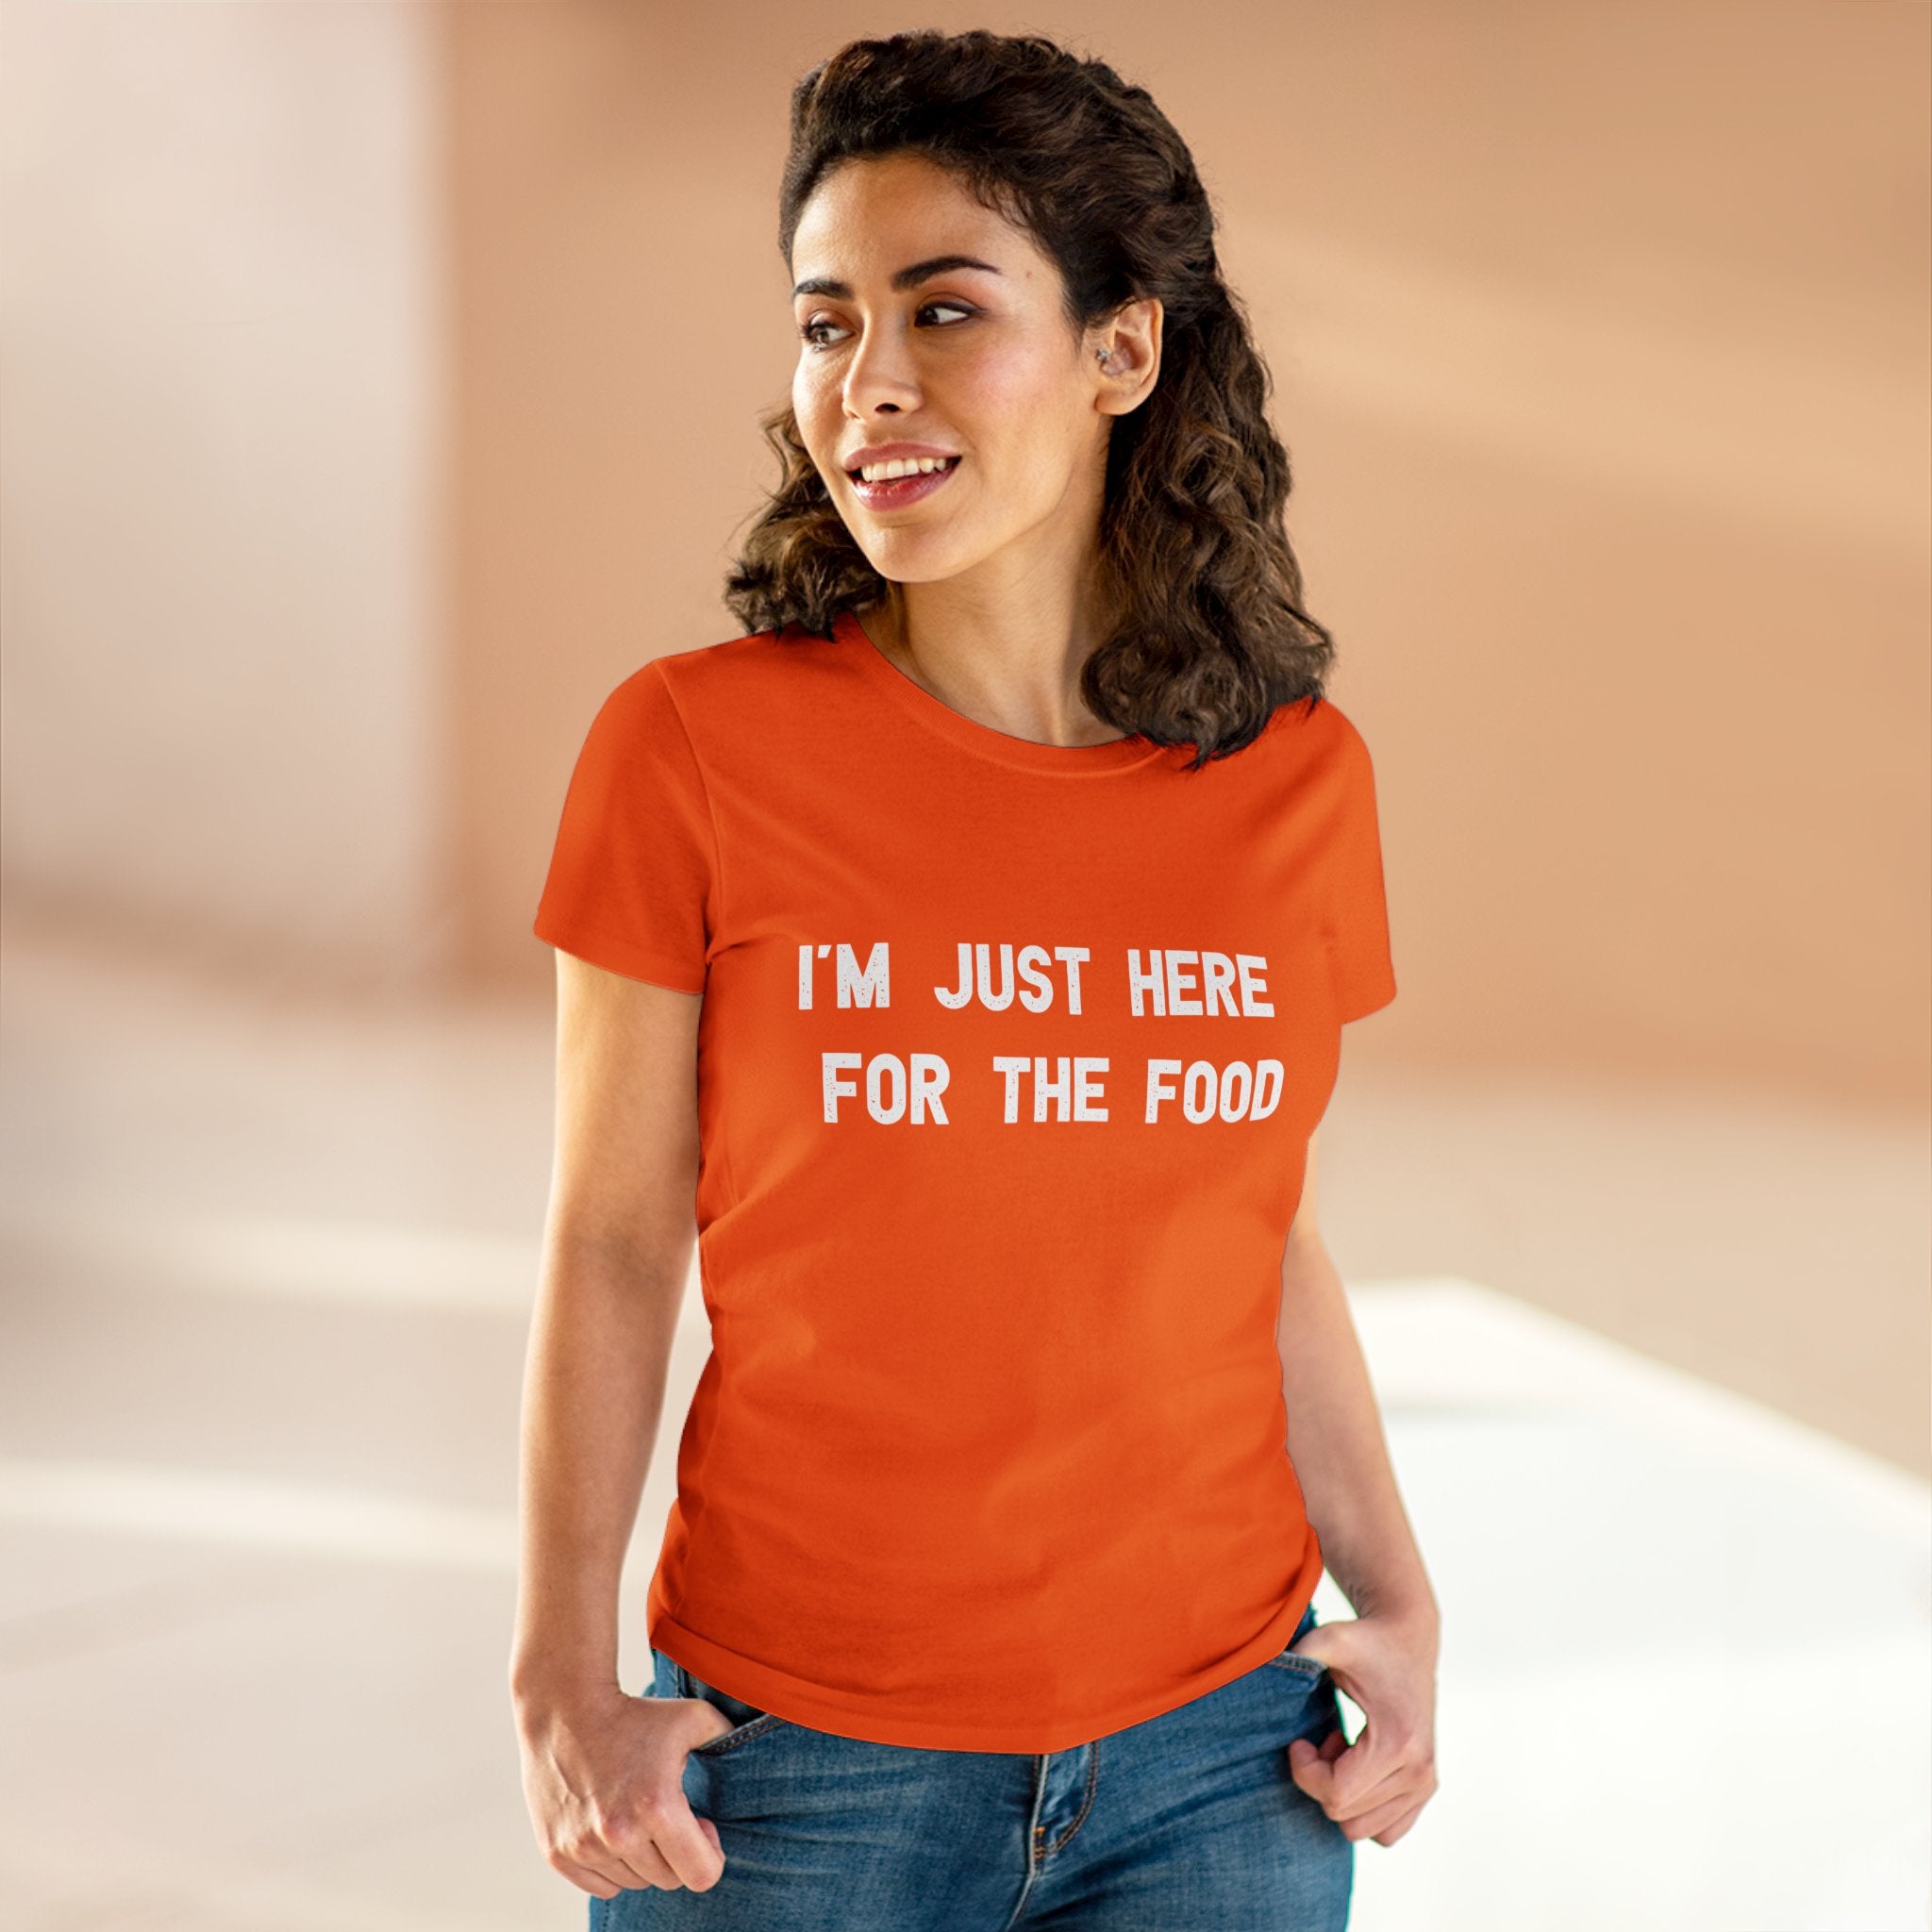 I'm Just Here For The Food - Women's Tee